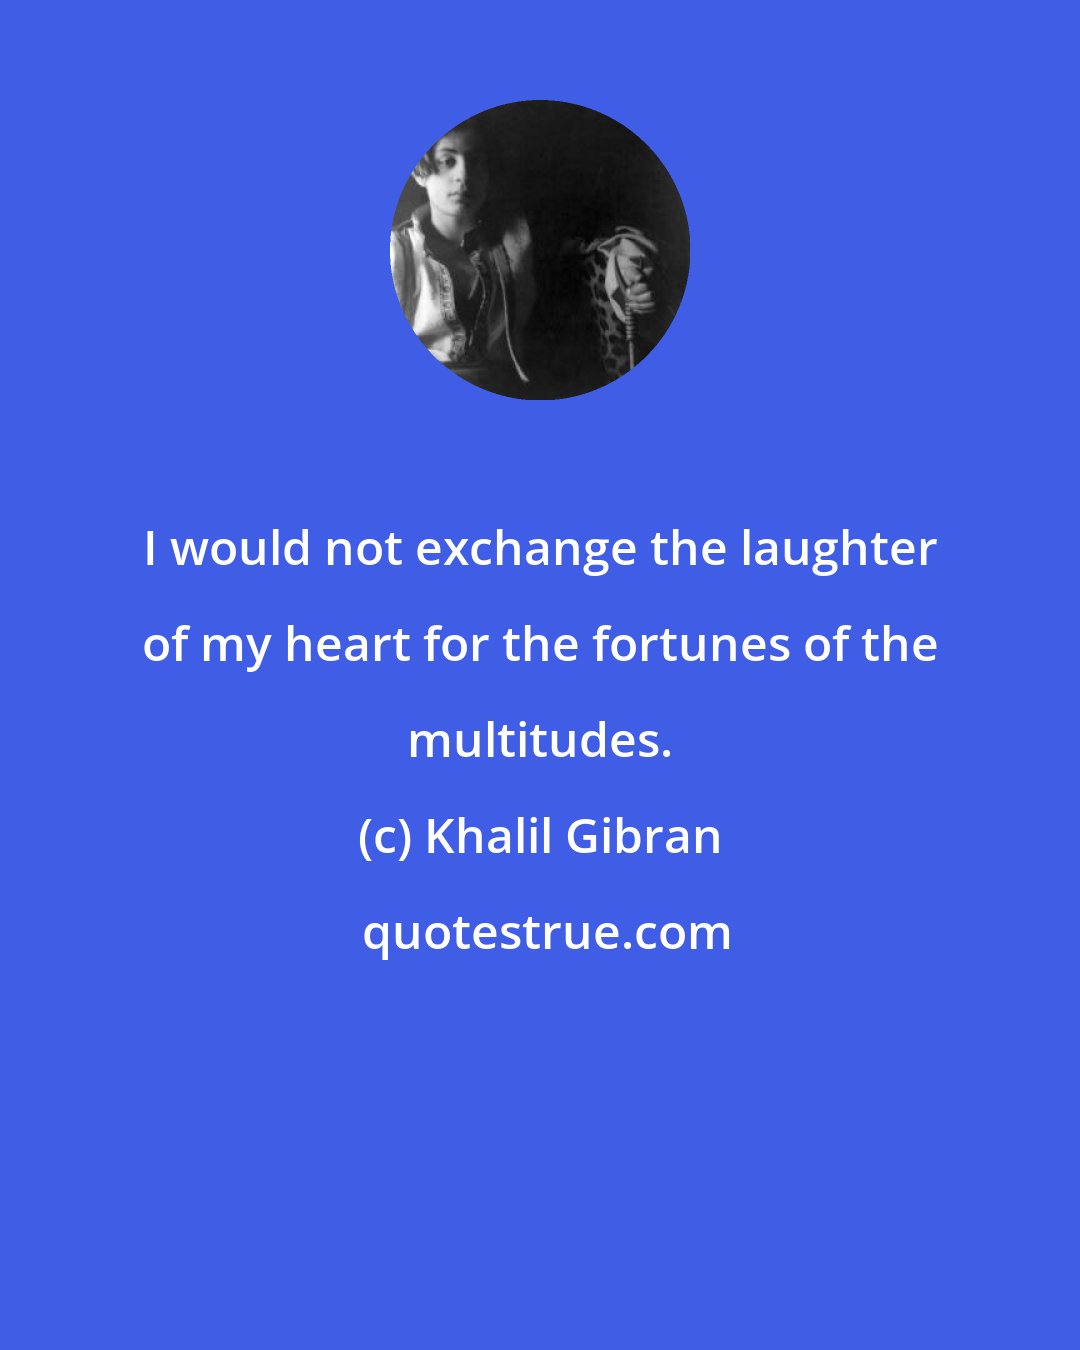 Khalil Gibran: I would not exchange the laughter of my heart for the fortunes of the multitudes.